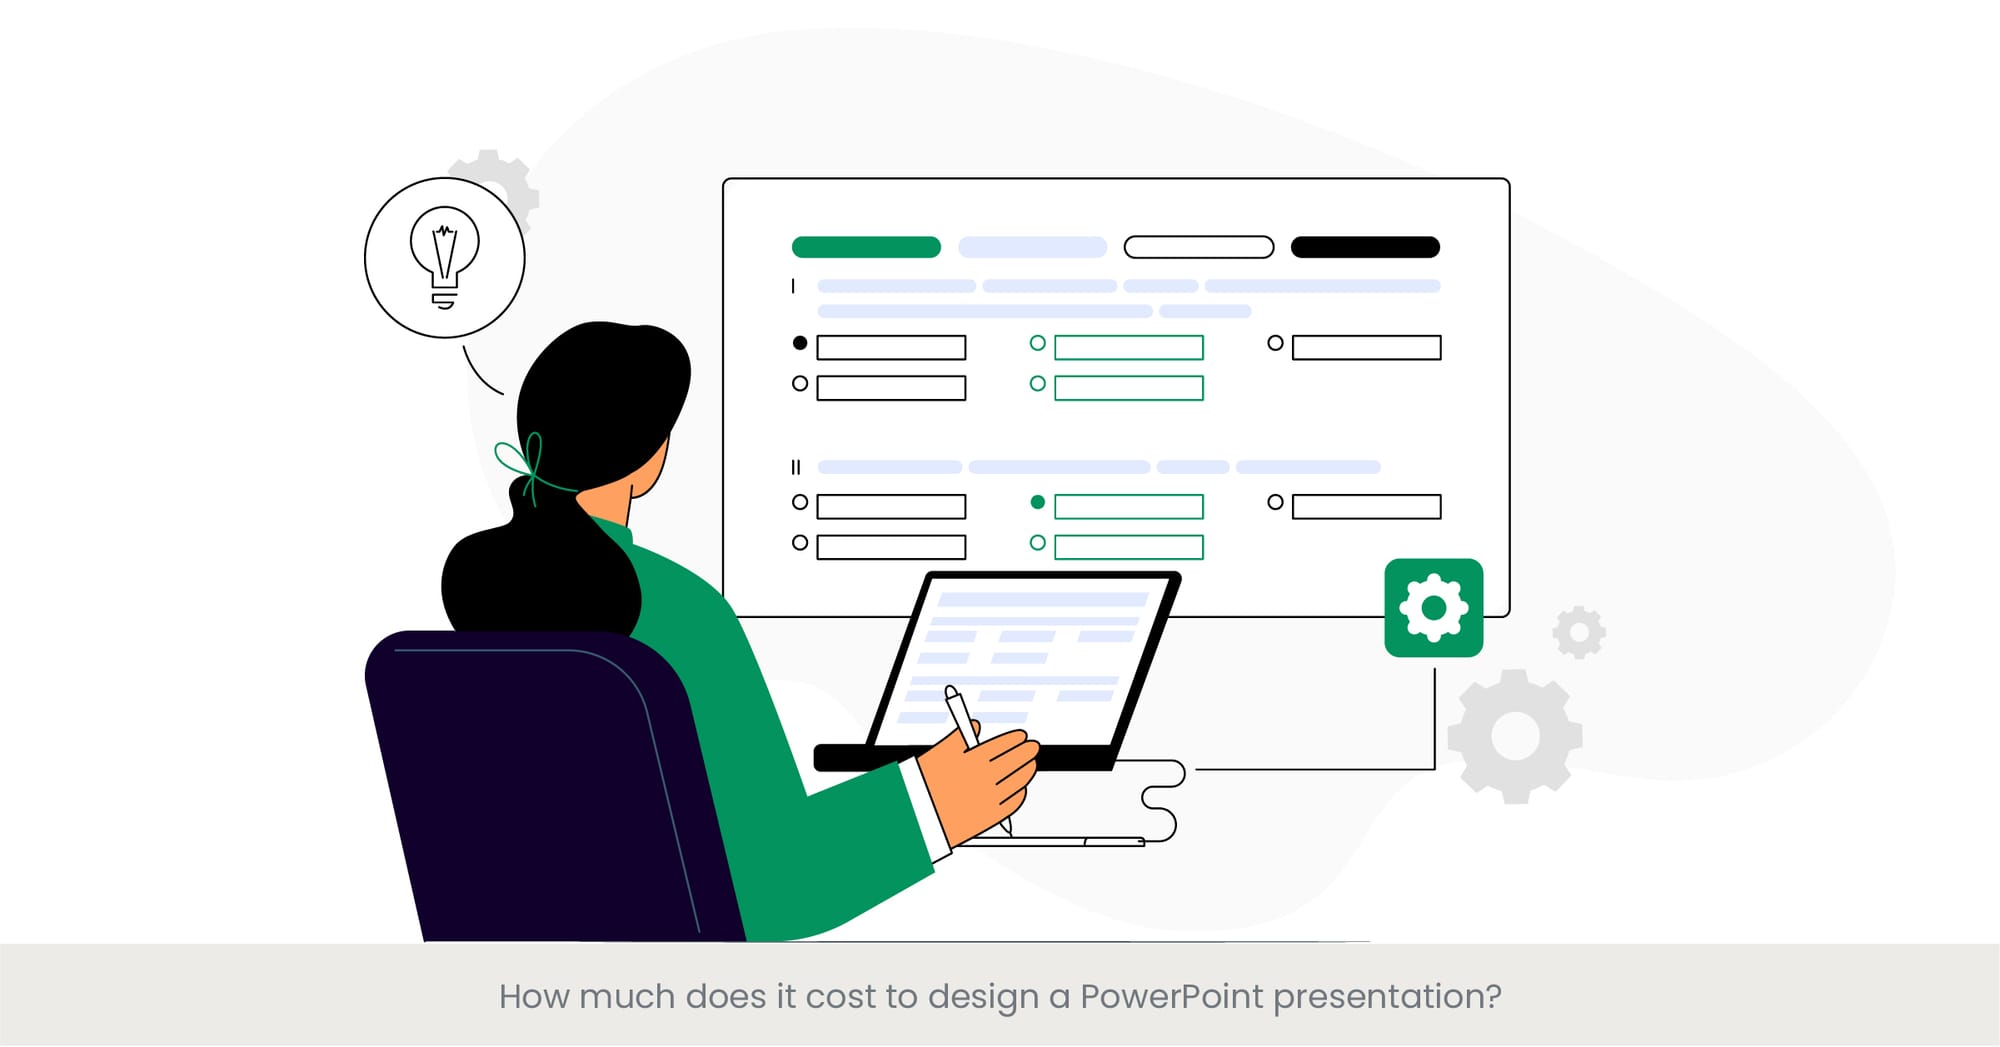 How much does it cost to design a PowerPoint presentation